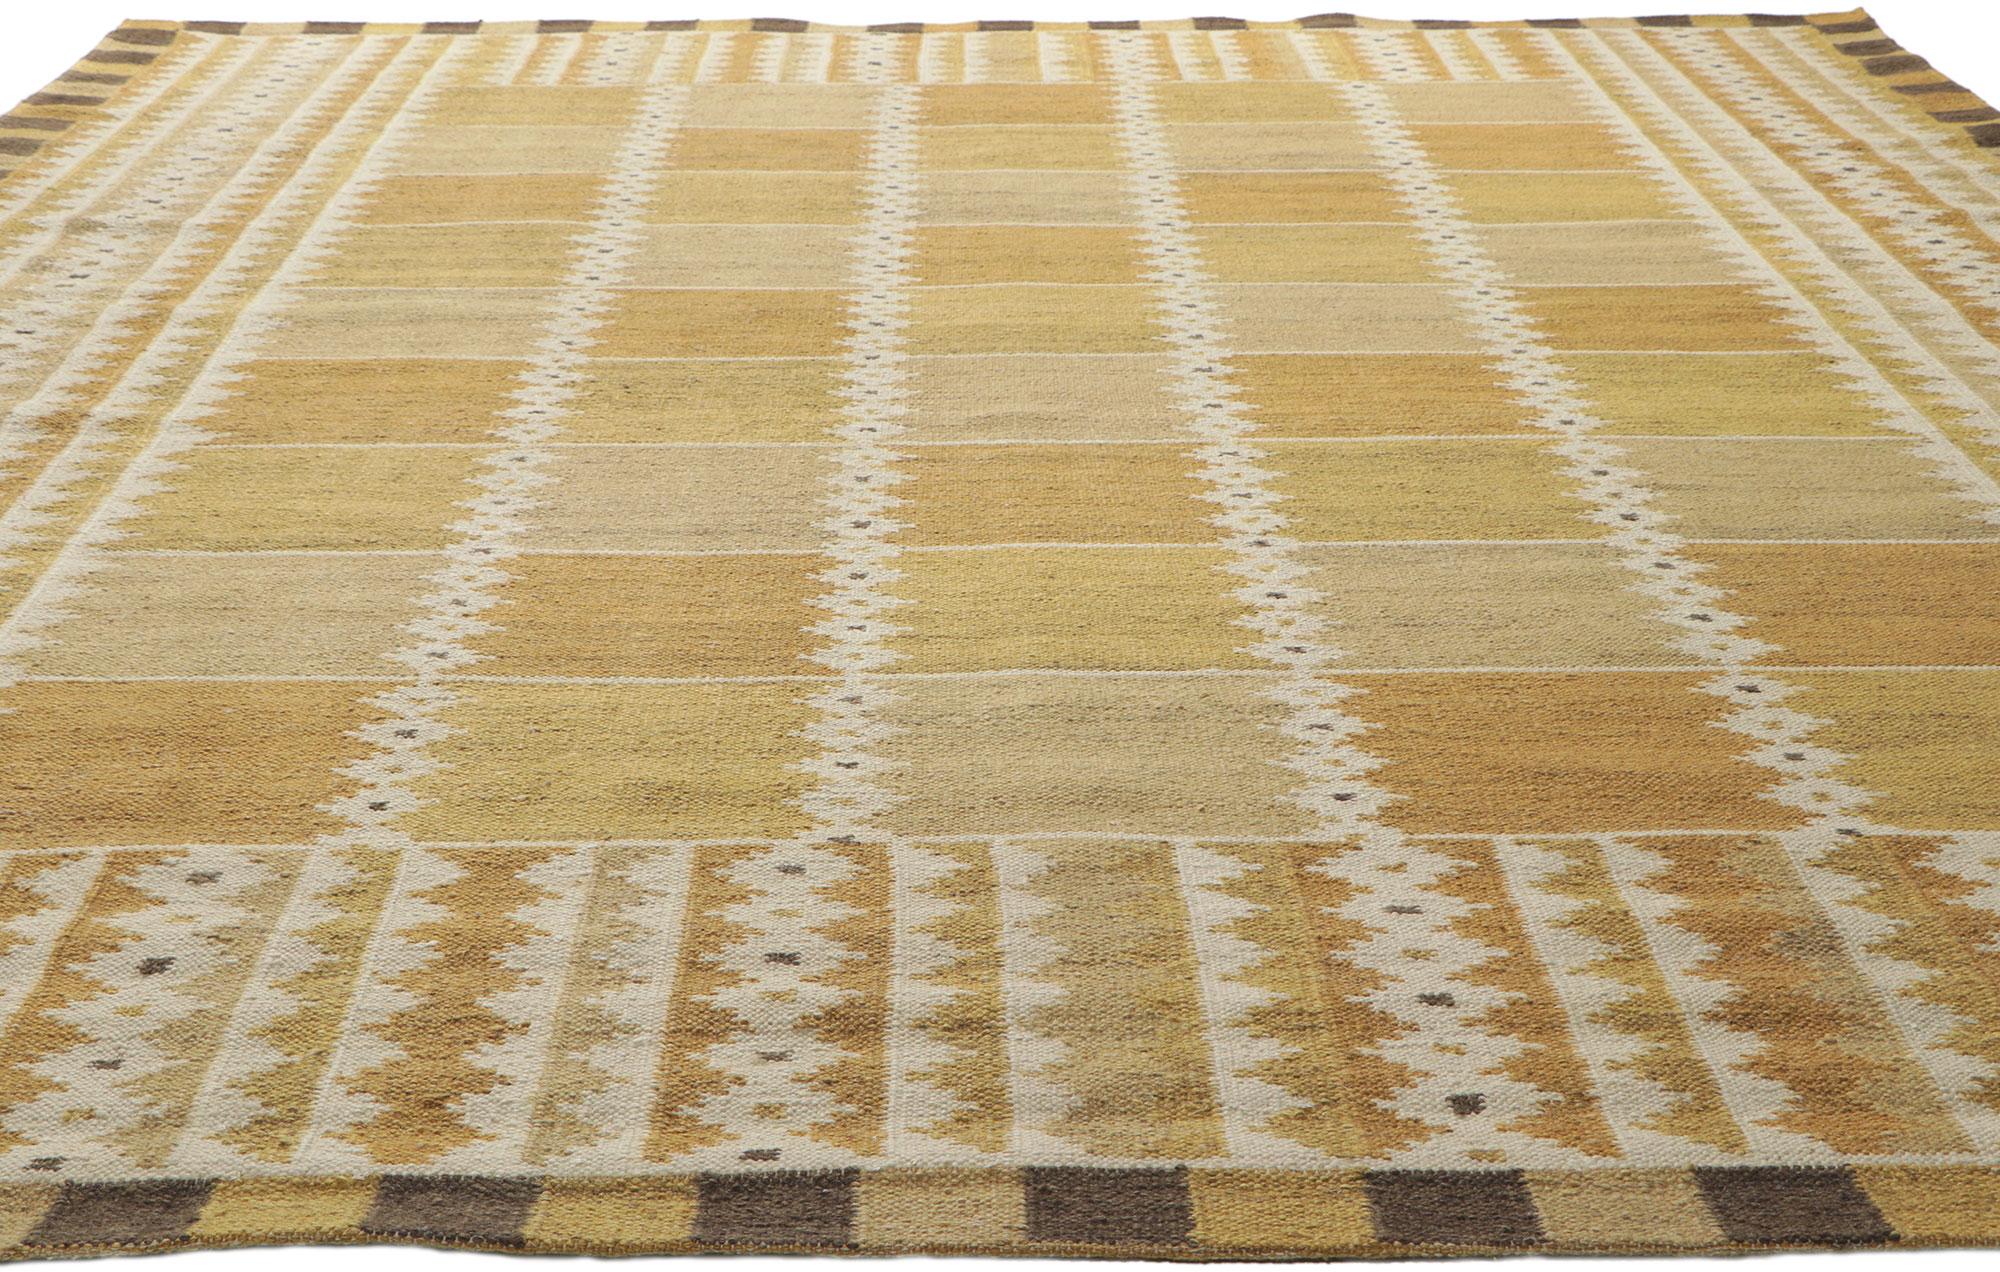 Scandinavian Modern New Swedish Style Kilim Rug Inspired by Marianne Richter and Barbro Nilsson